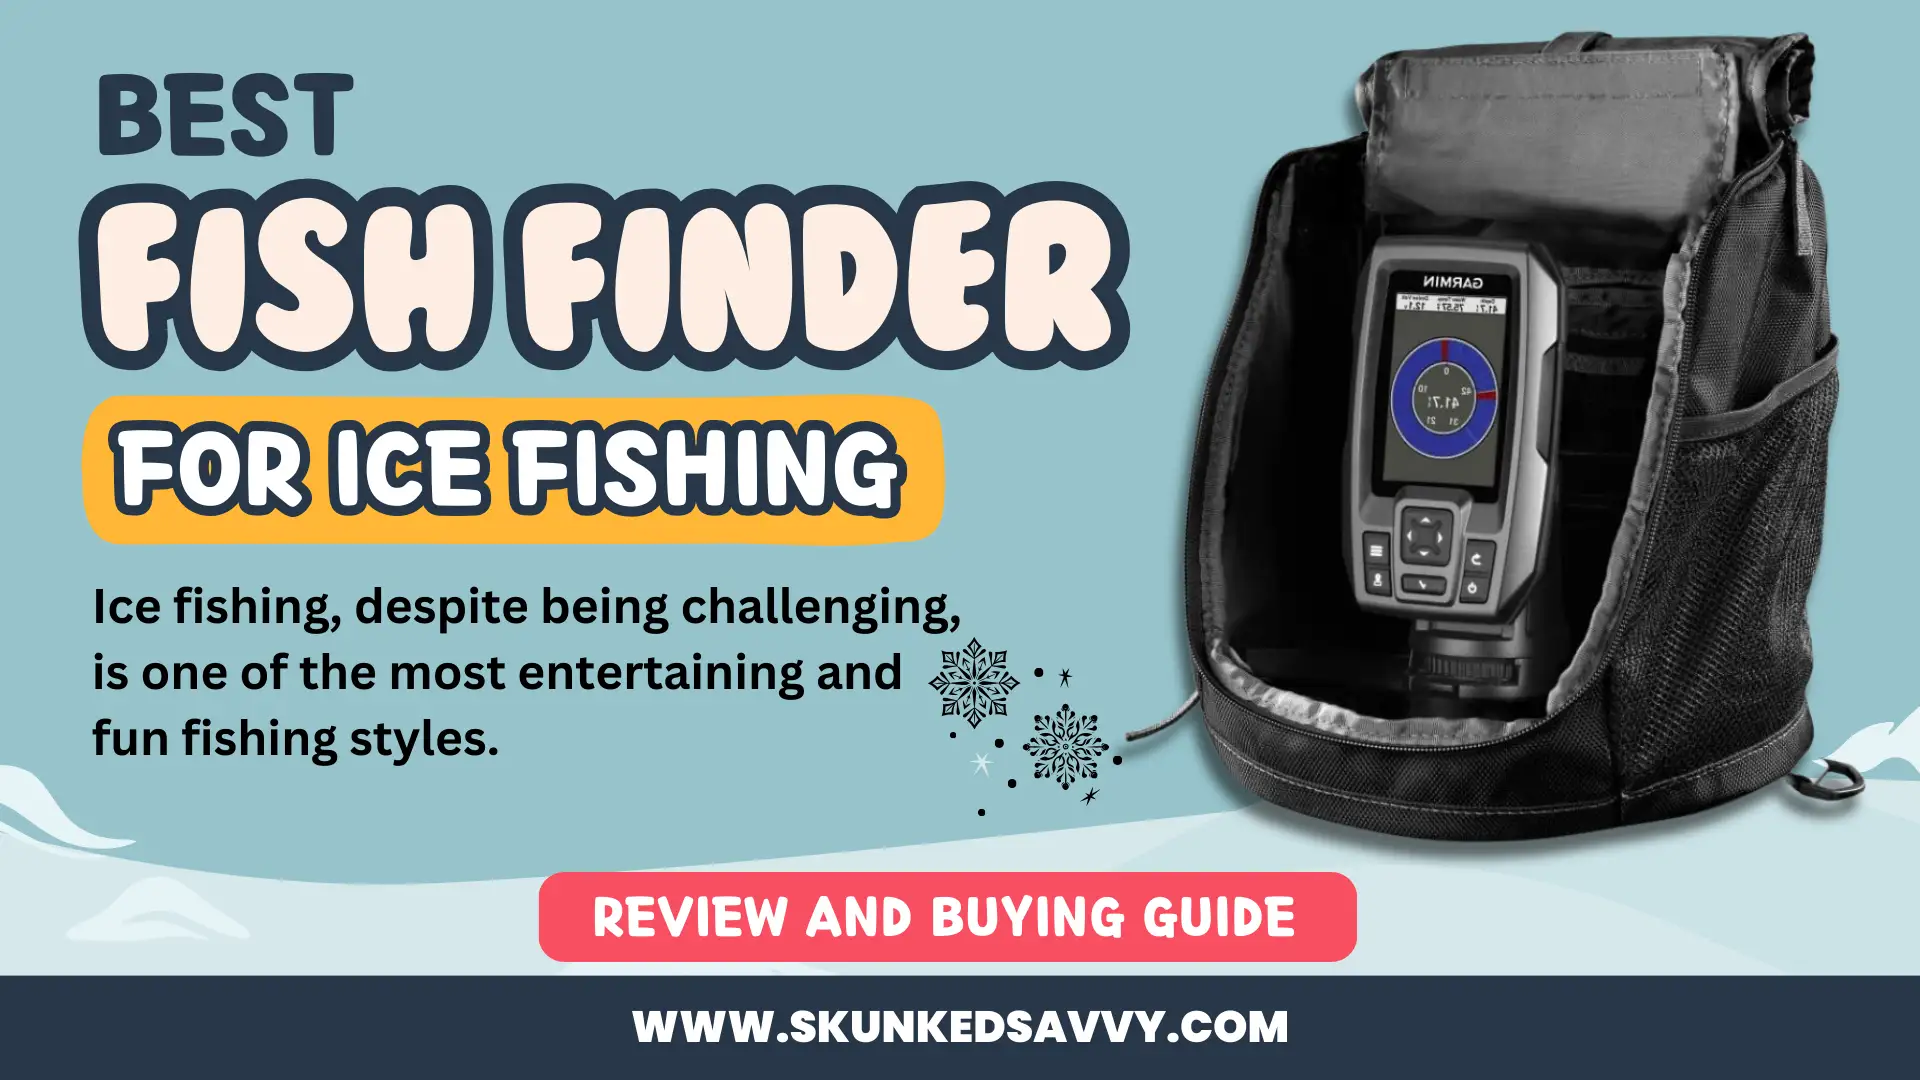 Best Fish Finder for Ice Fishing